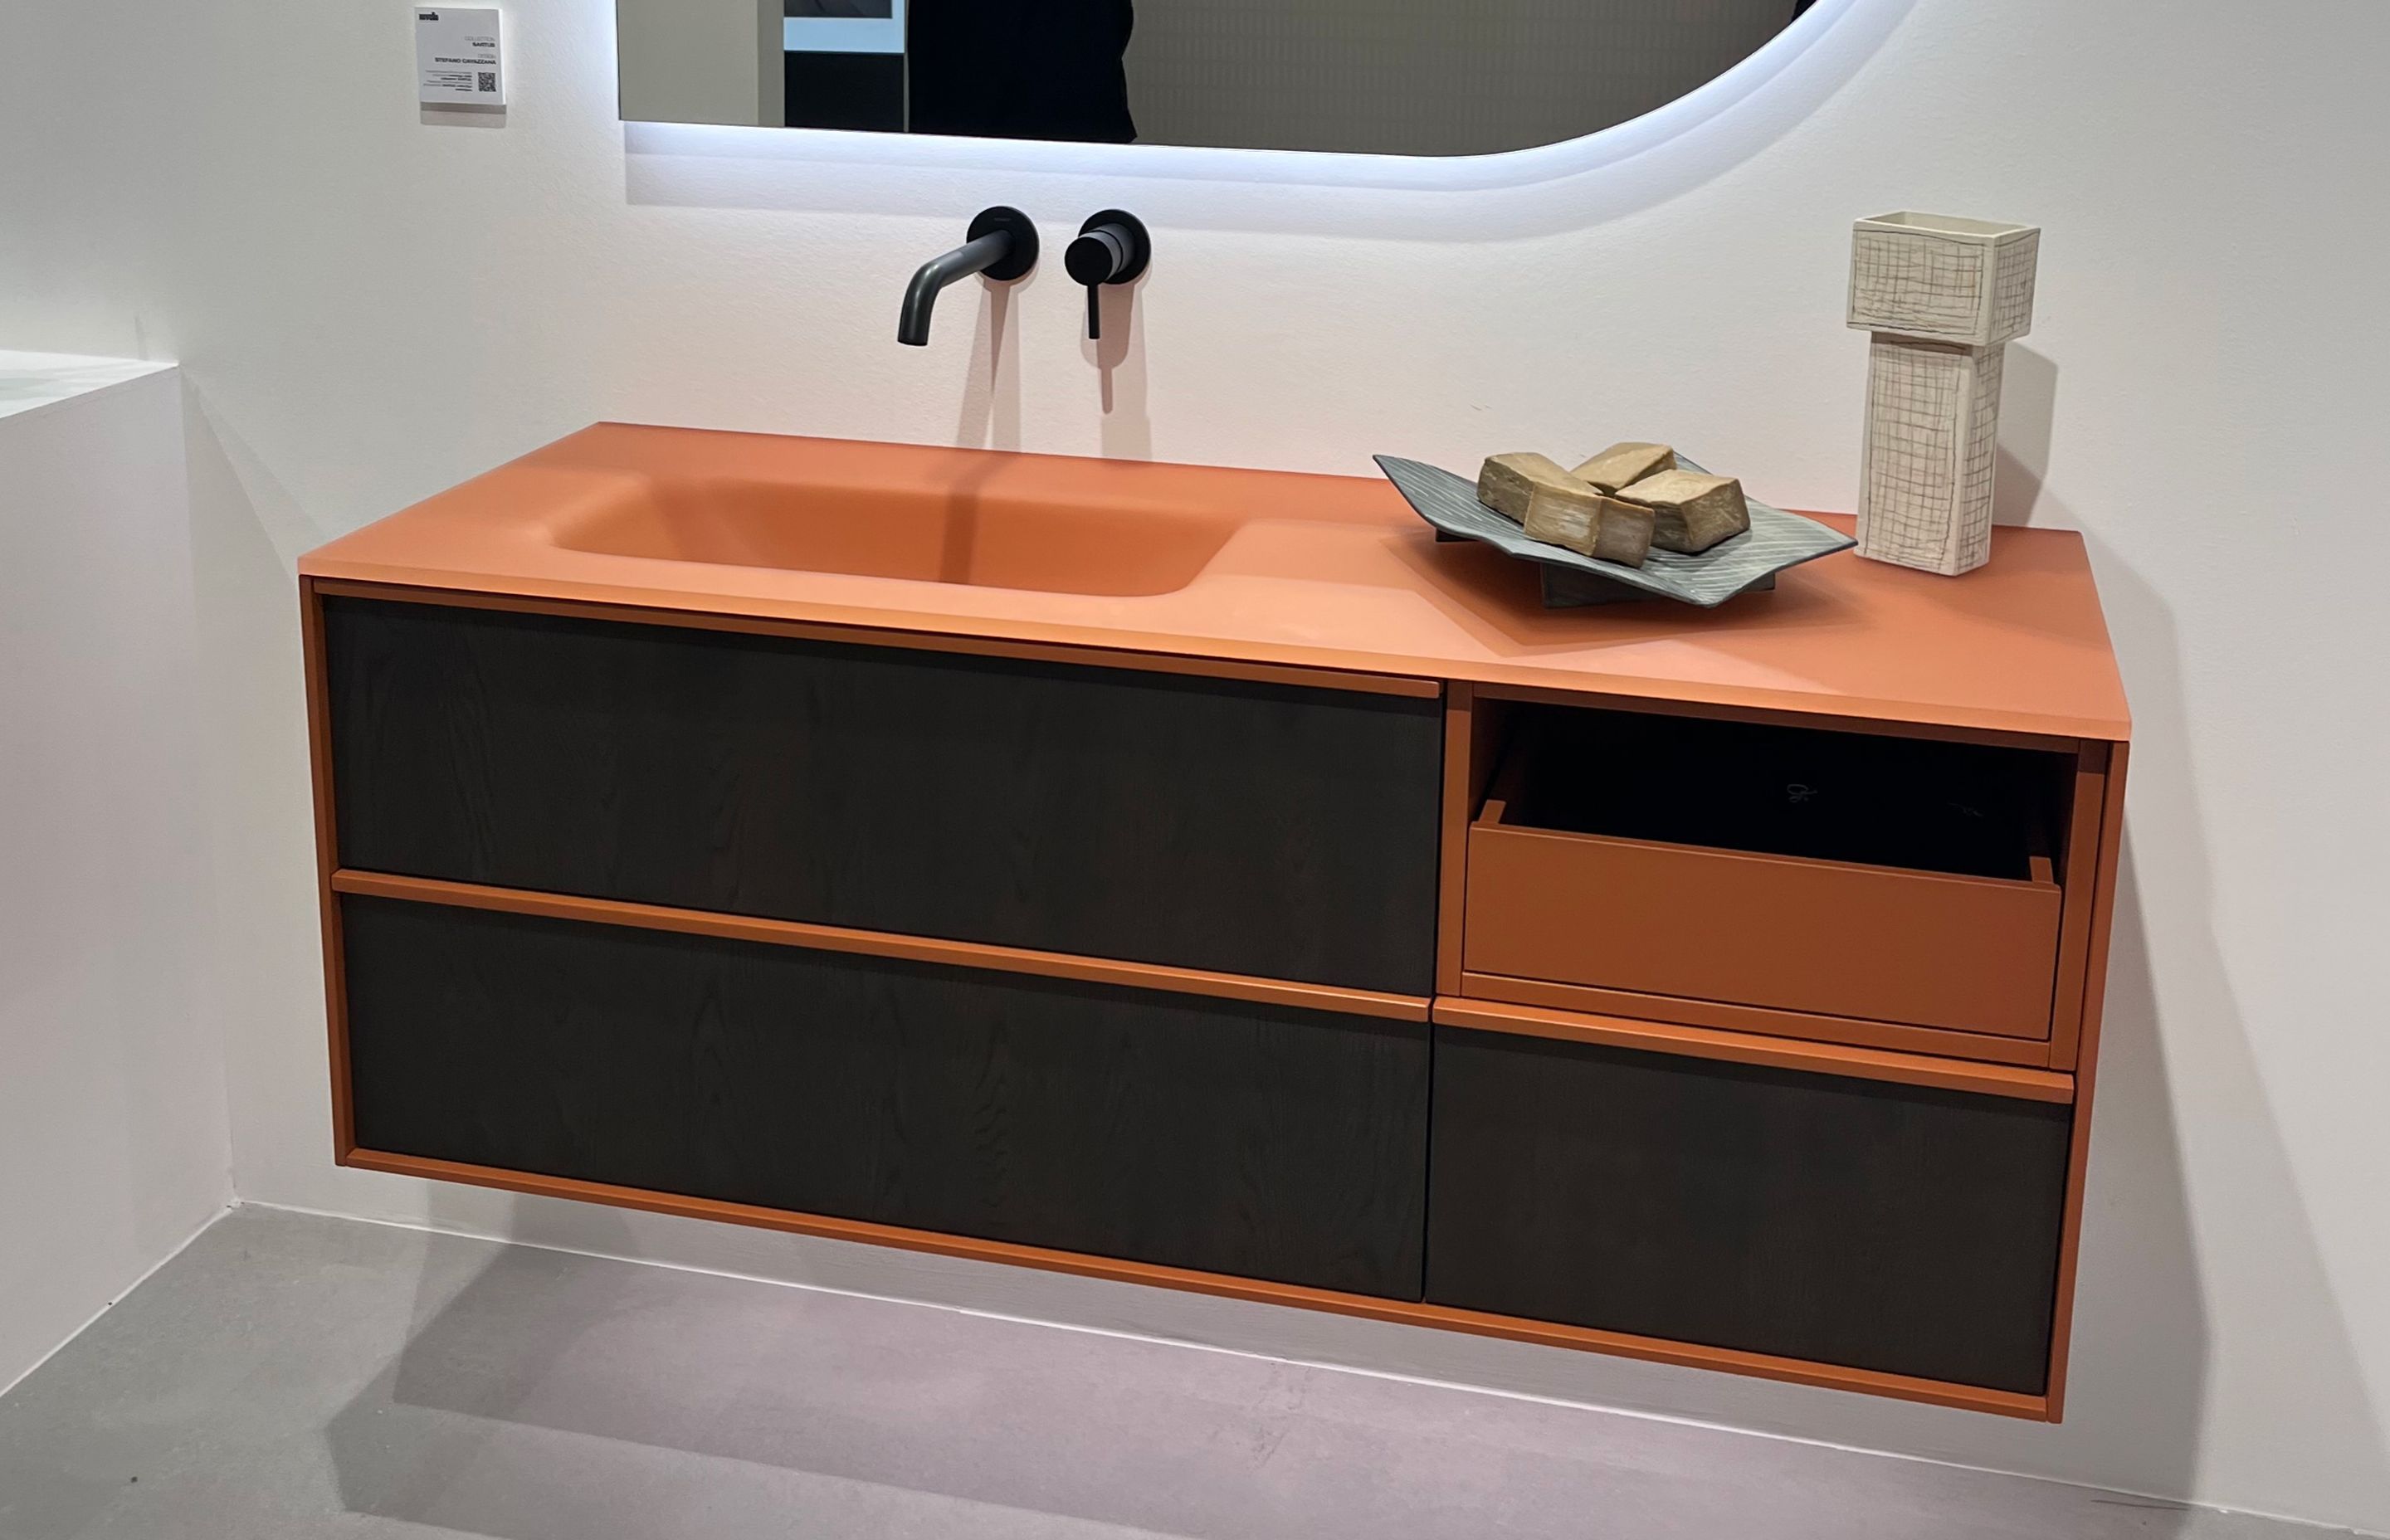 Matte finishes and bold colour palettes combine on this bathroom vanity seen at ISH.